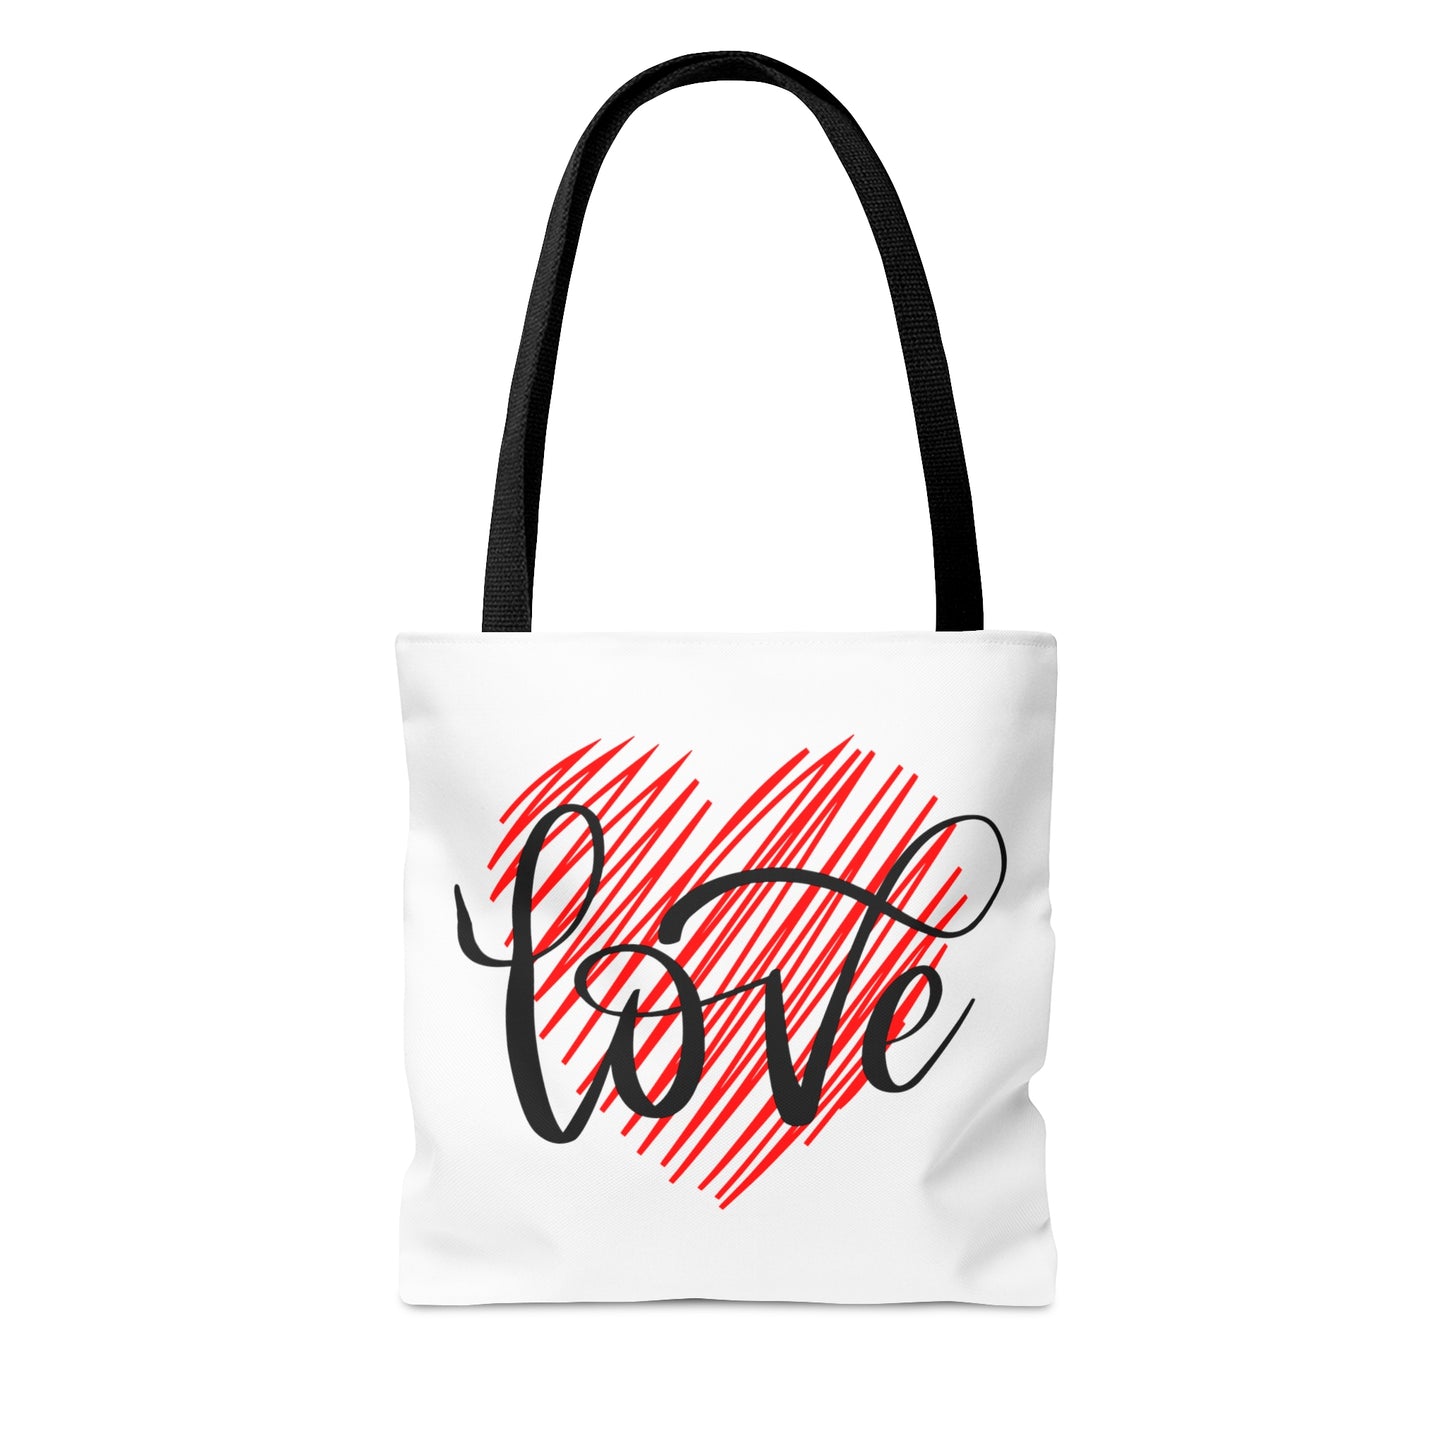 Beautiful Heart with Love Printed Tote Bag, Valentine's Tote Bag